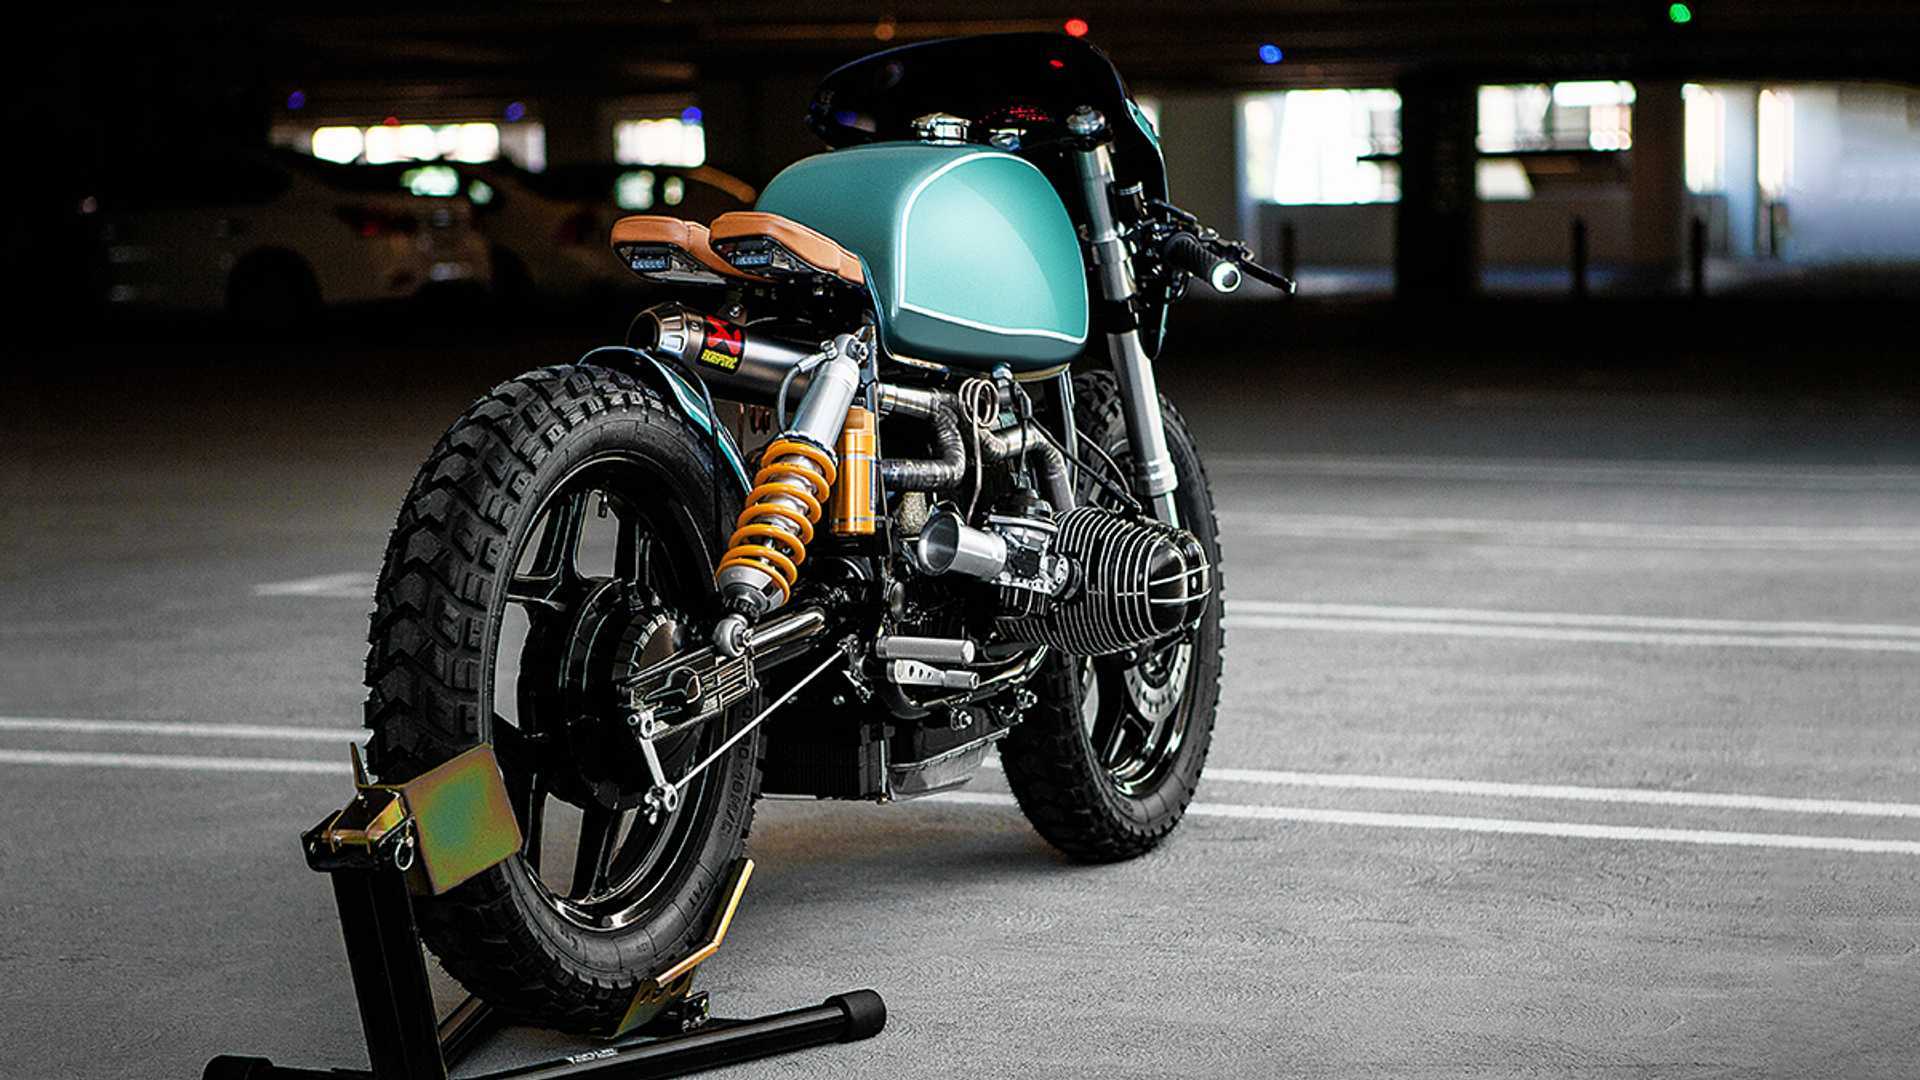 Enter To Win This Amazing Pair Of BMW R100 Cafe Racers